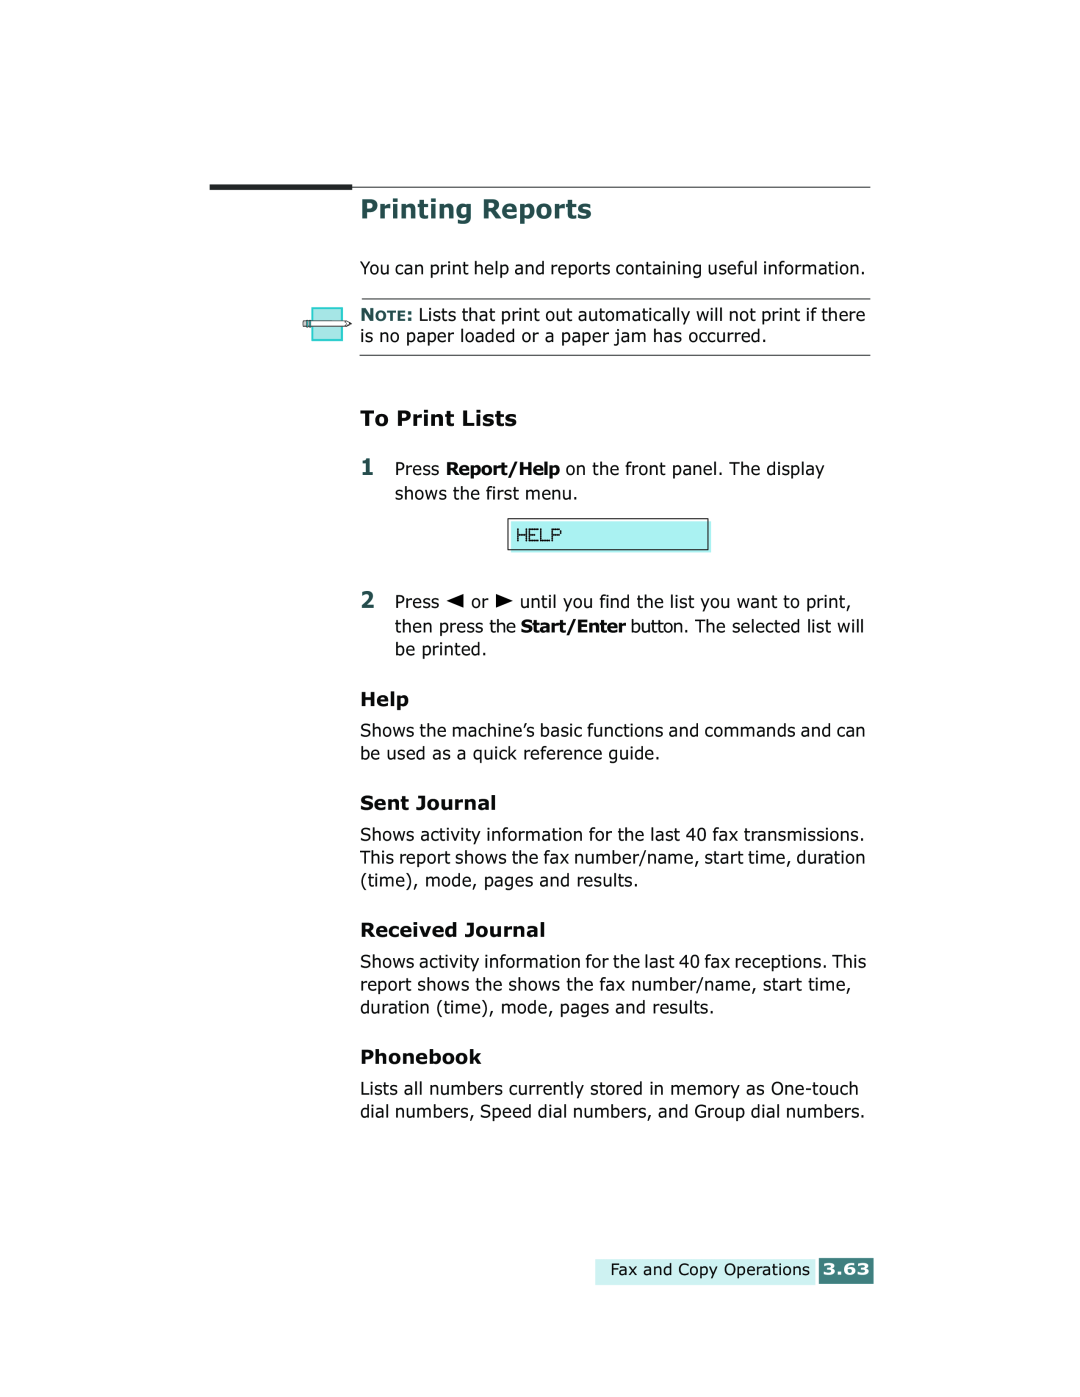 Xerox Pro 580 manual Printing Reports, To Print Lists, Help, Sent Journal, Received Journal, Phonebook 